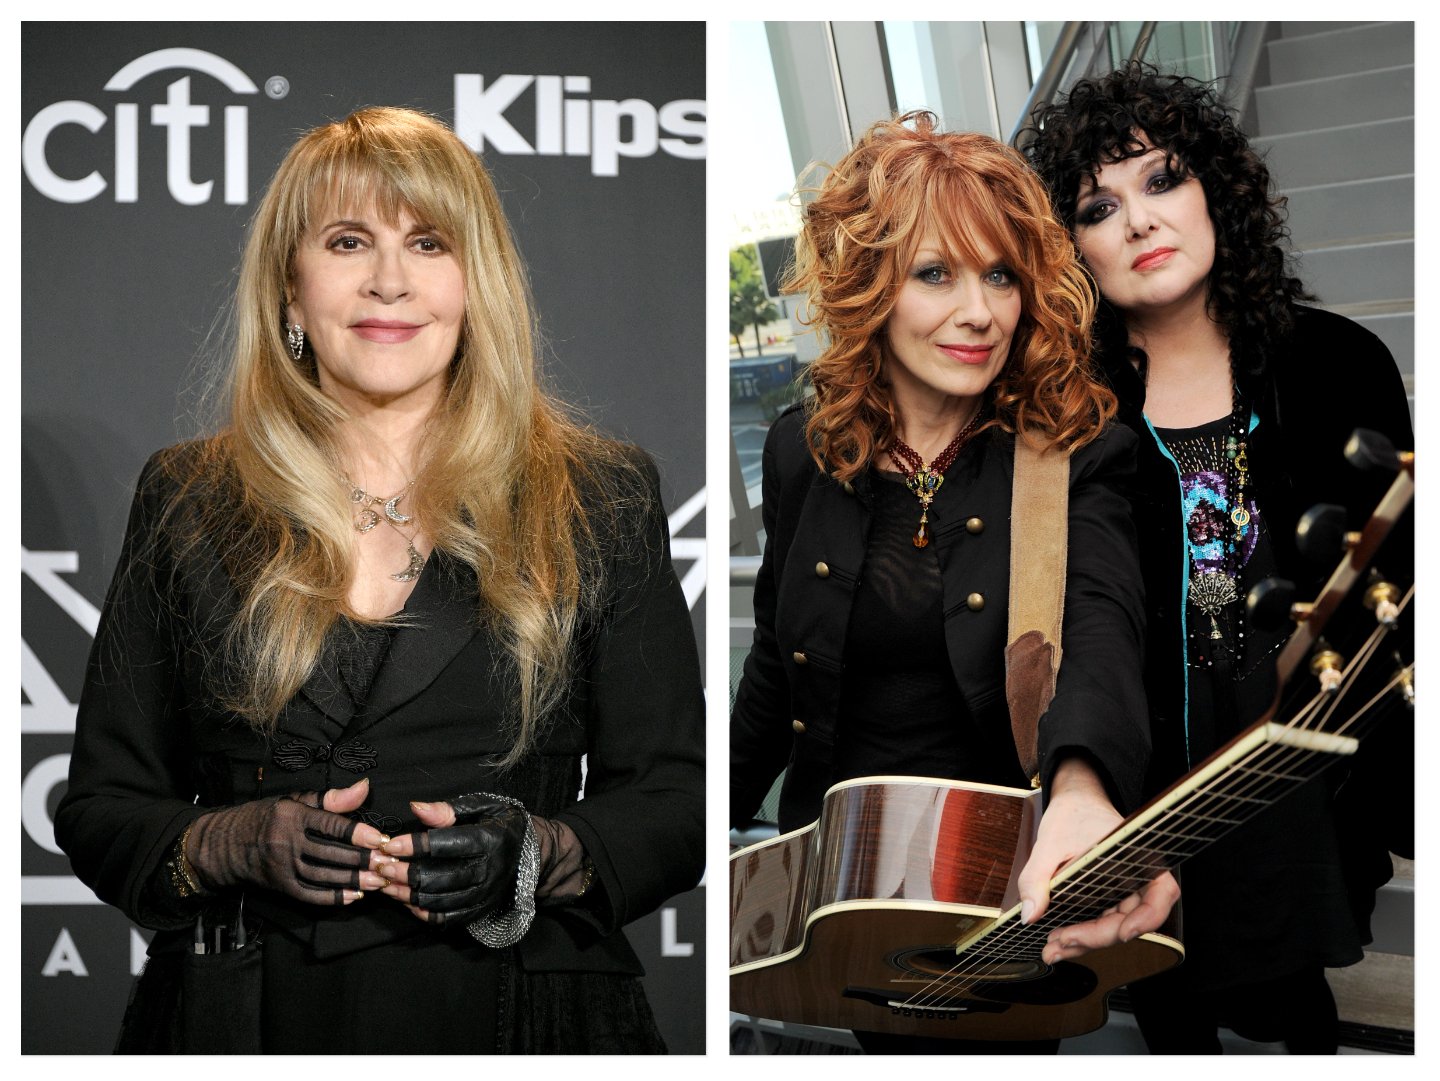 Stevie Nicks wears a black dress and black fingerless gloves and Ann and Nancy Wilson of Heart wear black and hold a guitar.